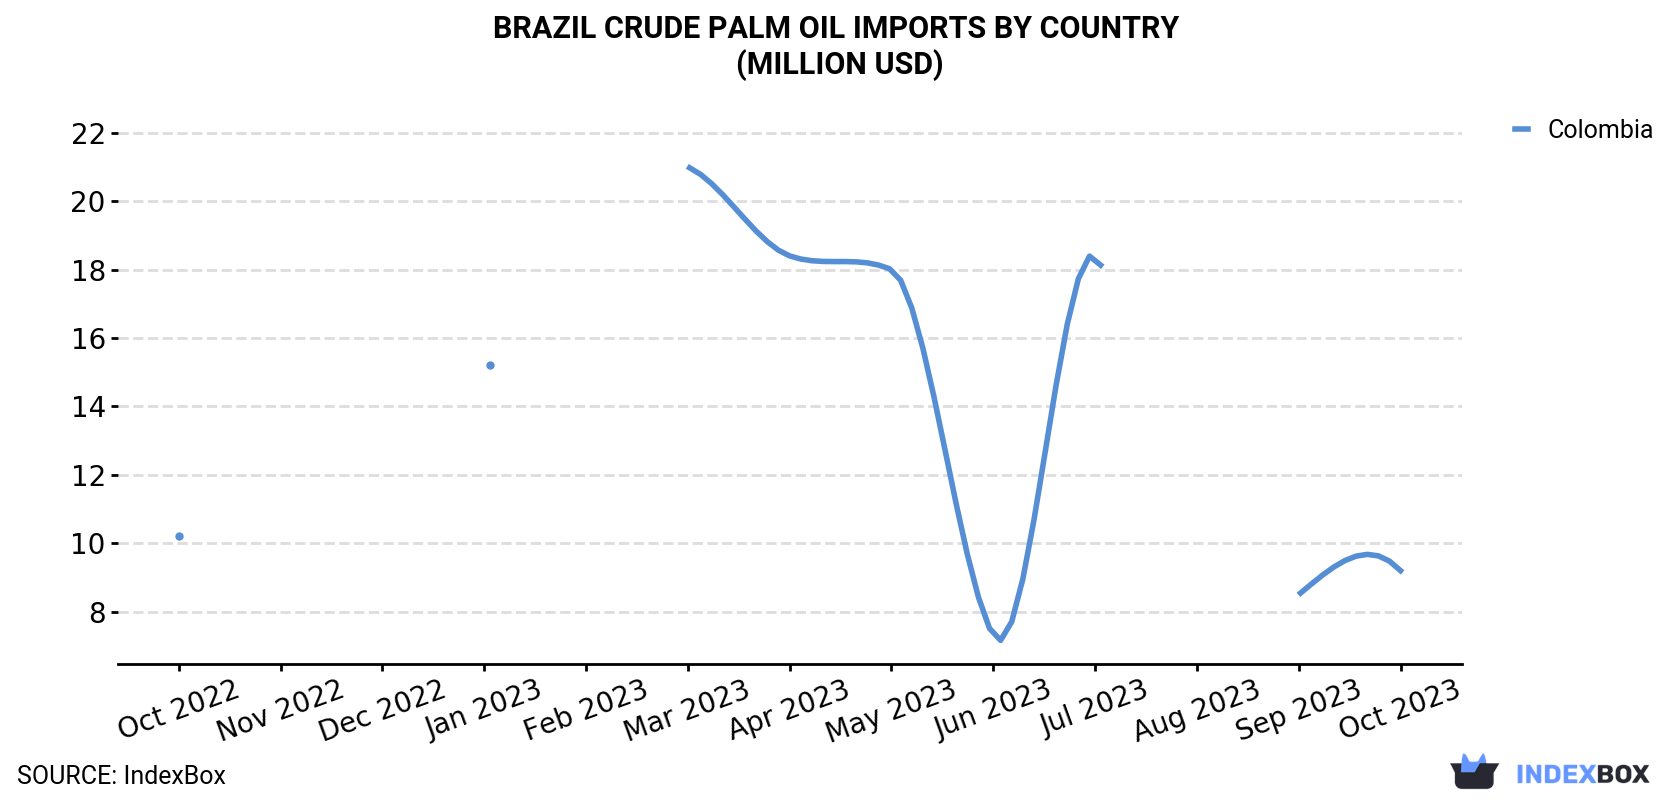 Brazil Crude Palm Oil Imports By Country (Million USD)